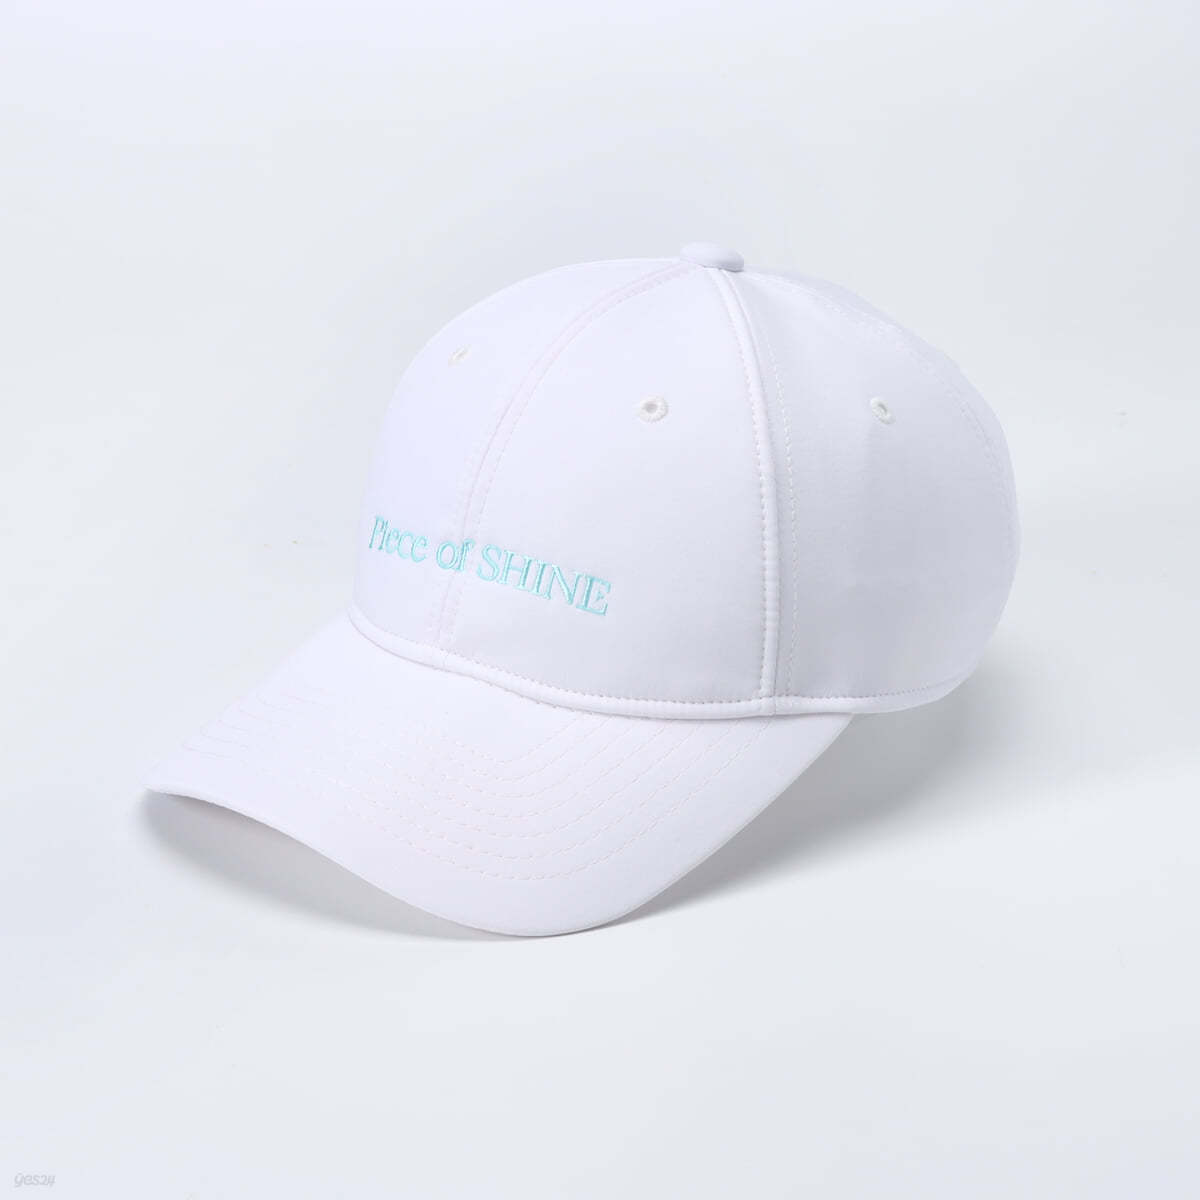 2023 SHINee Fanmeeting [Everyday is SHINee DAY - 'Piece of SHINE'] BALL CAP